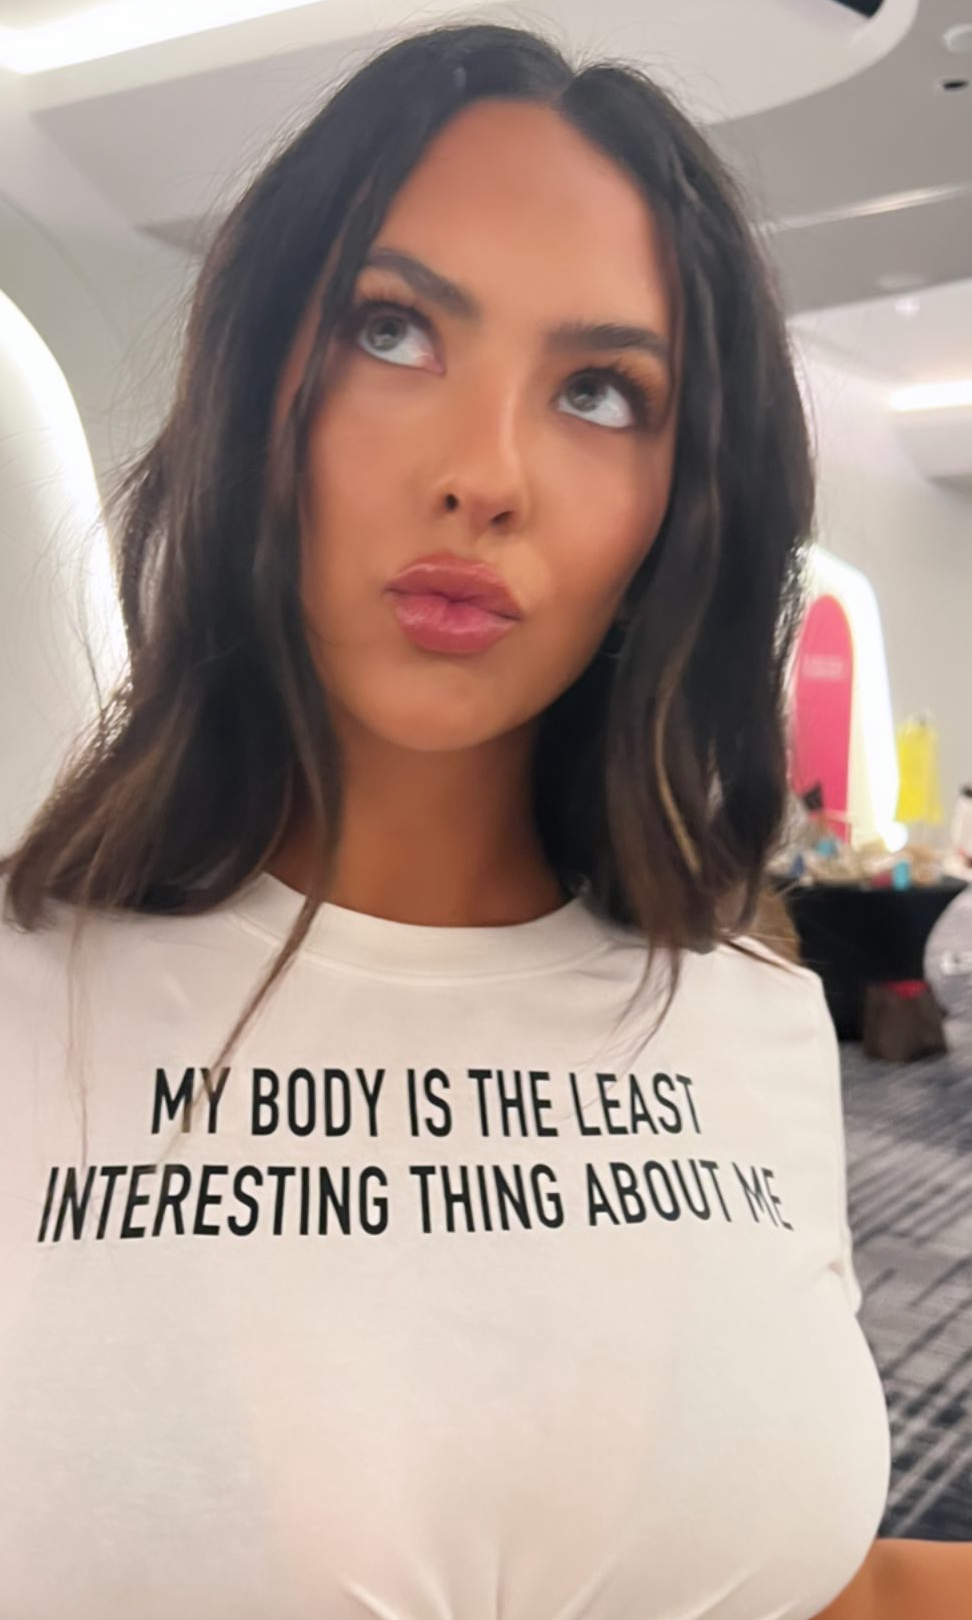 “My Body Is The Least Interesting Thing About Me”